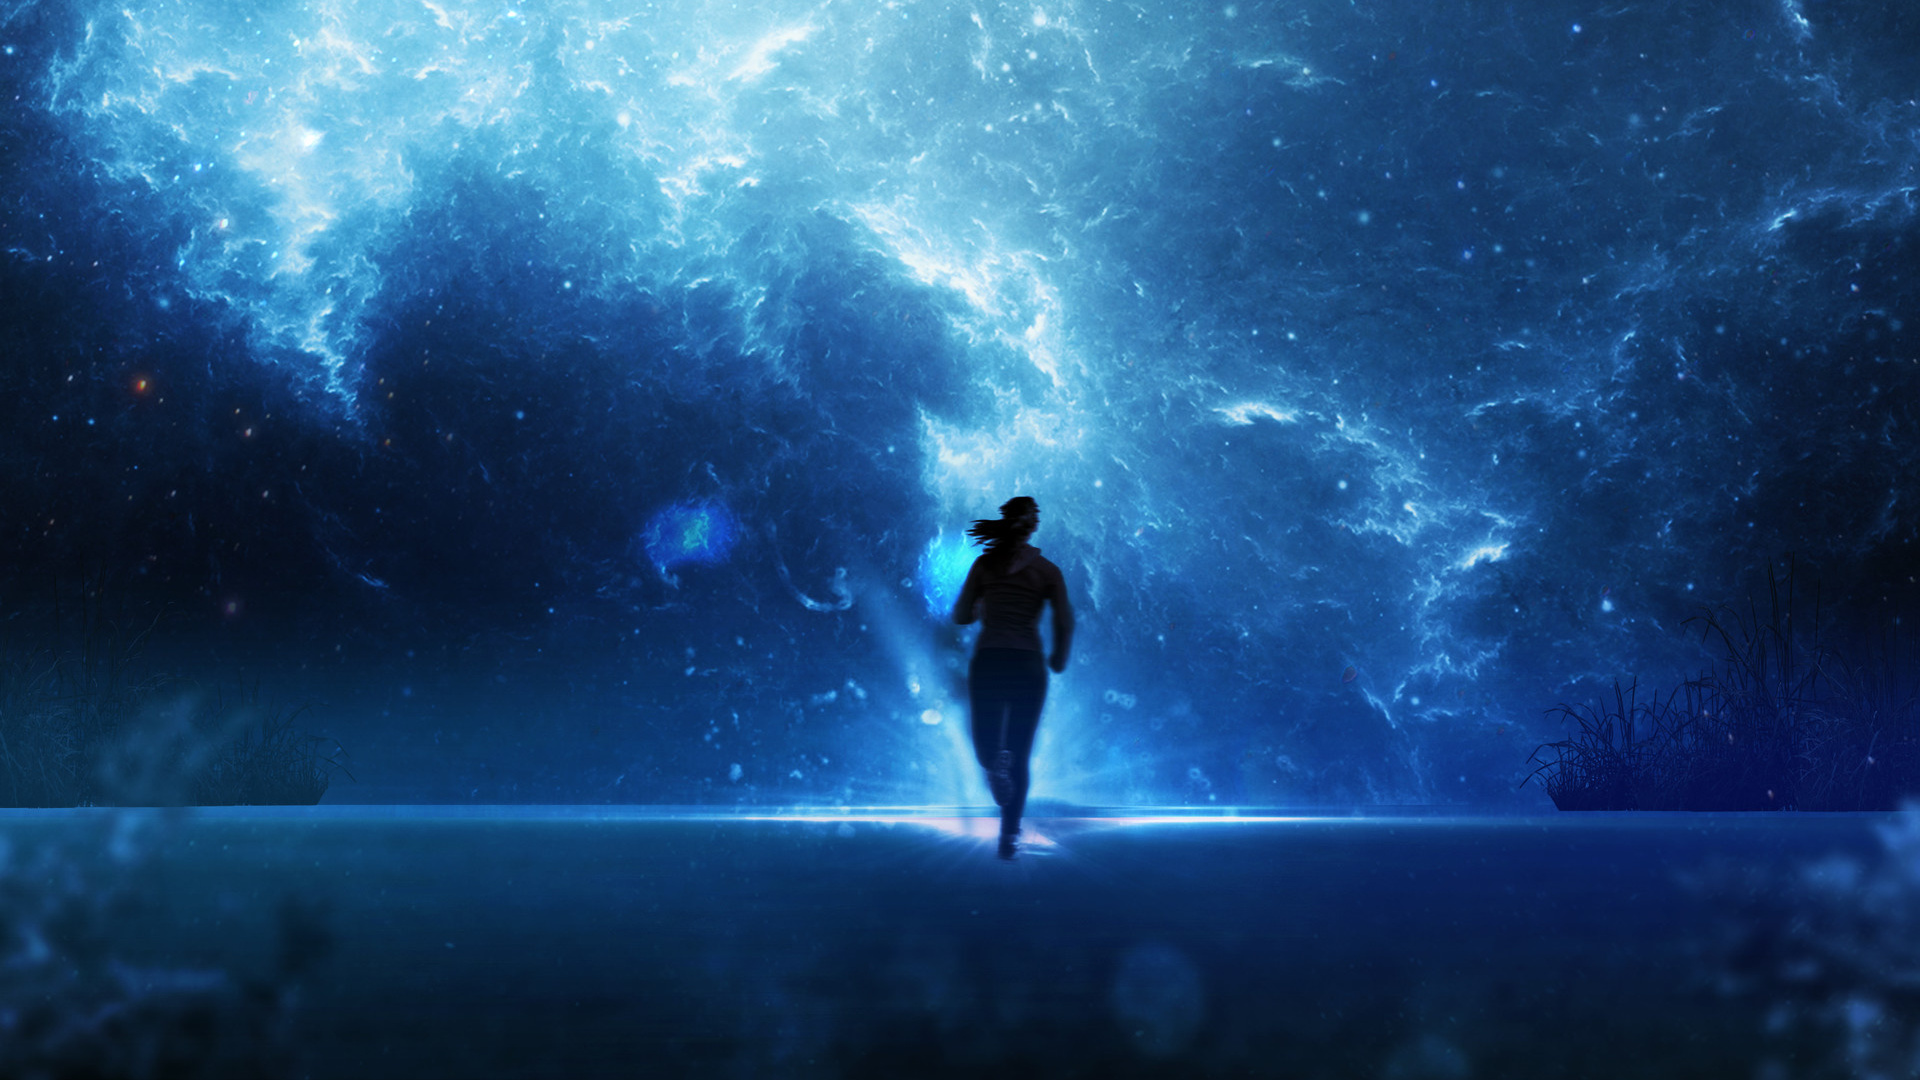 Man in Black Jacket and Pants Standing on Black Rock Under Starry Night. Wallpaper in 1920x1080 Resolution